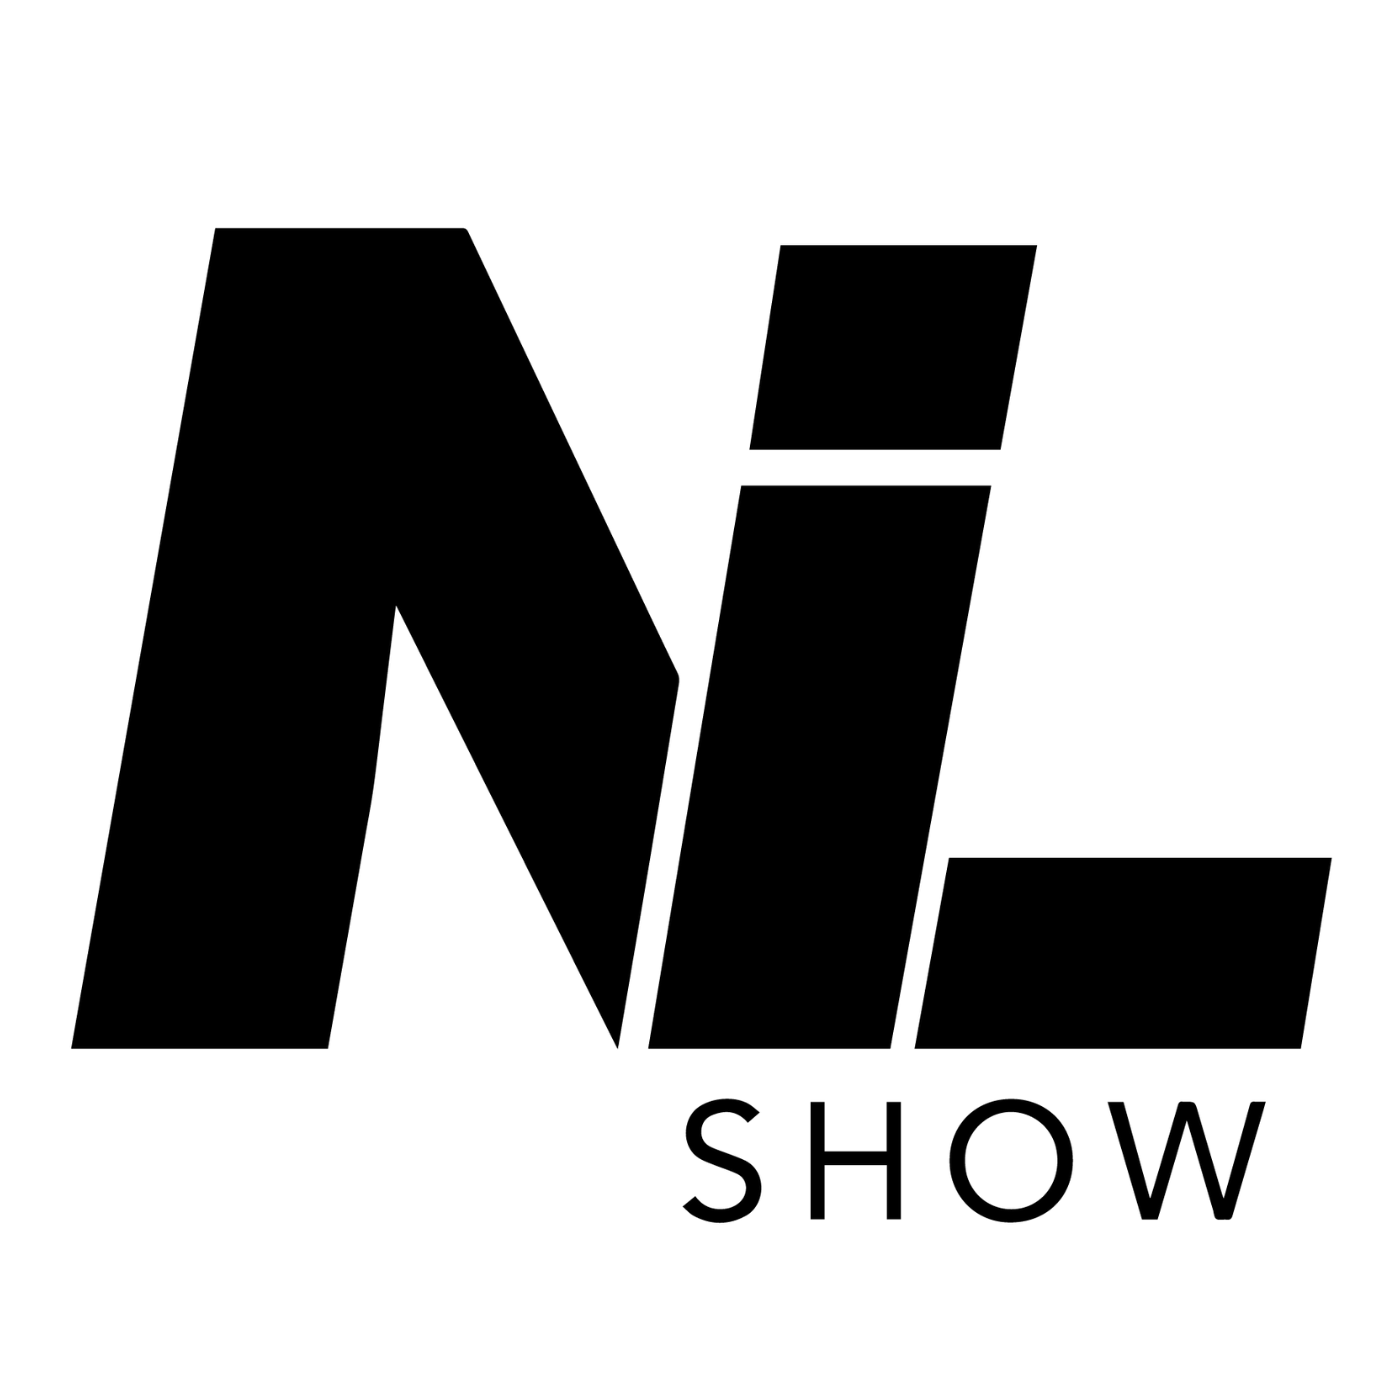 Show artwork for The NIL Show by Campus Ink